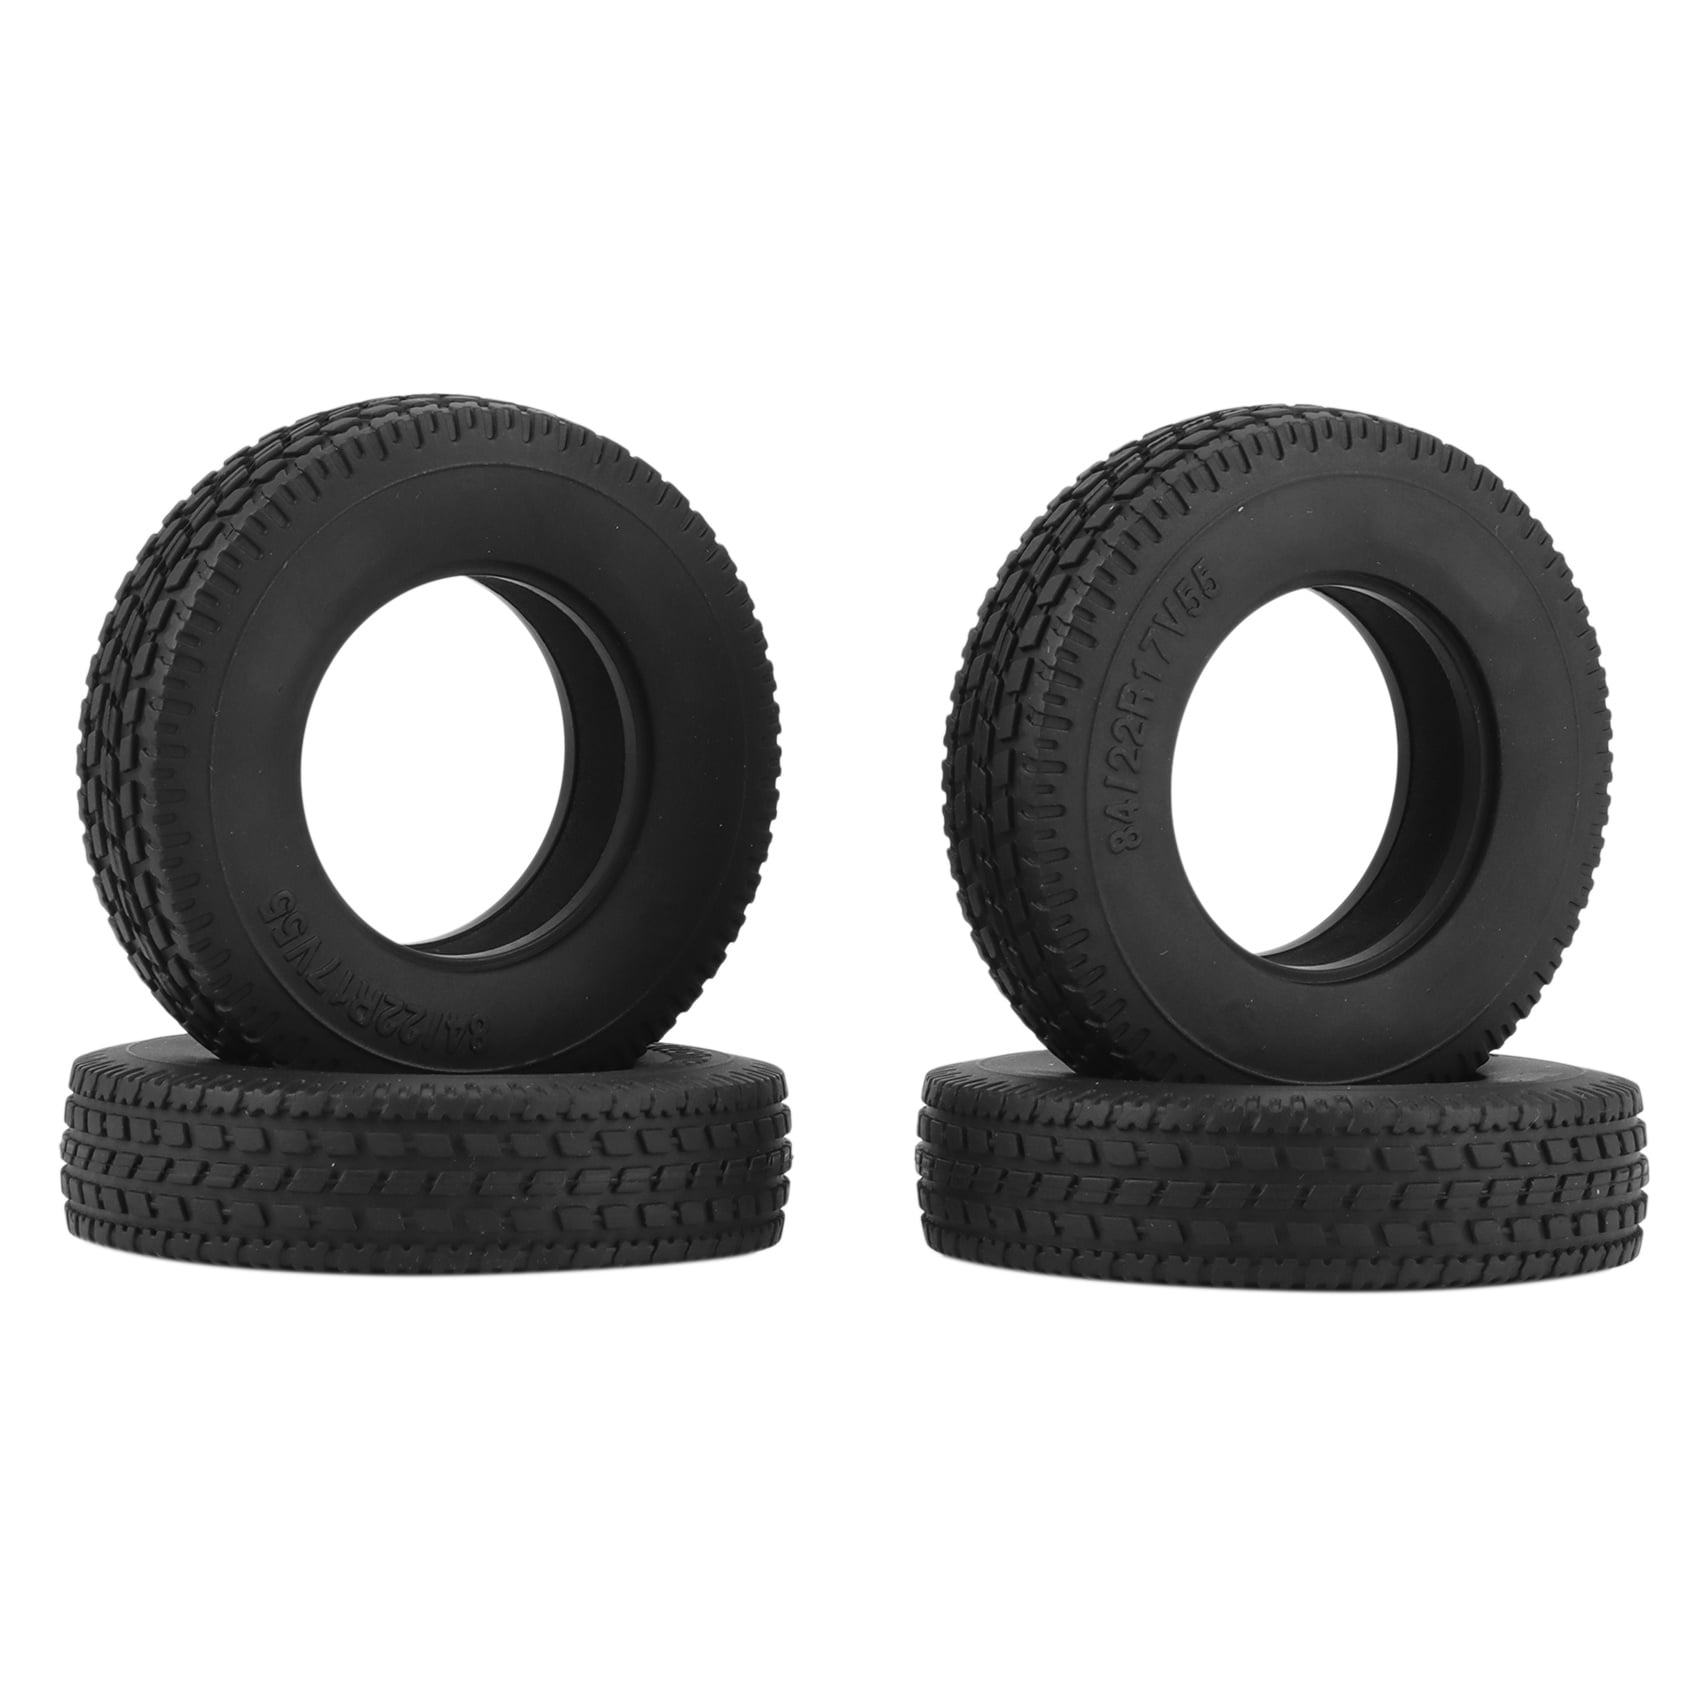 Wheel Rubber Tire Tyres Widen 22mm For 1/14 Tamiya RC Truck Trailer Tractor 